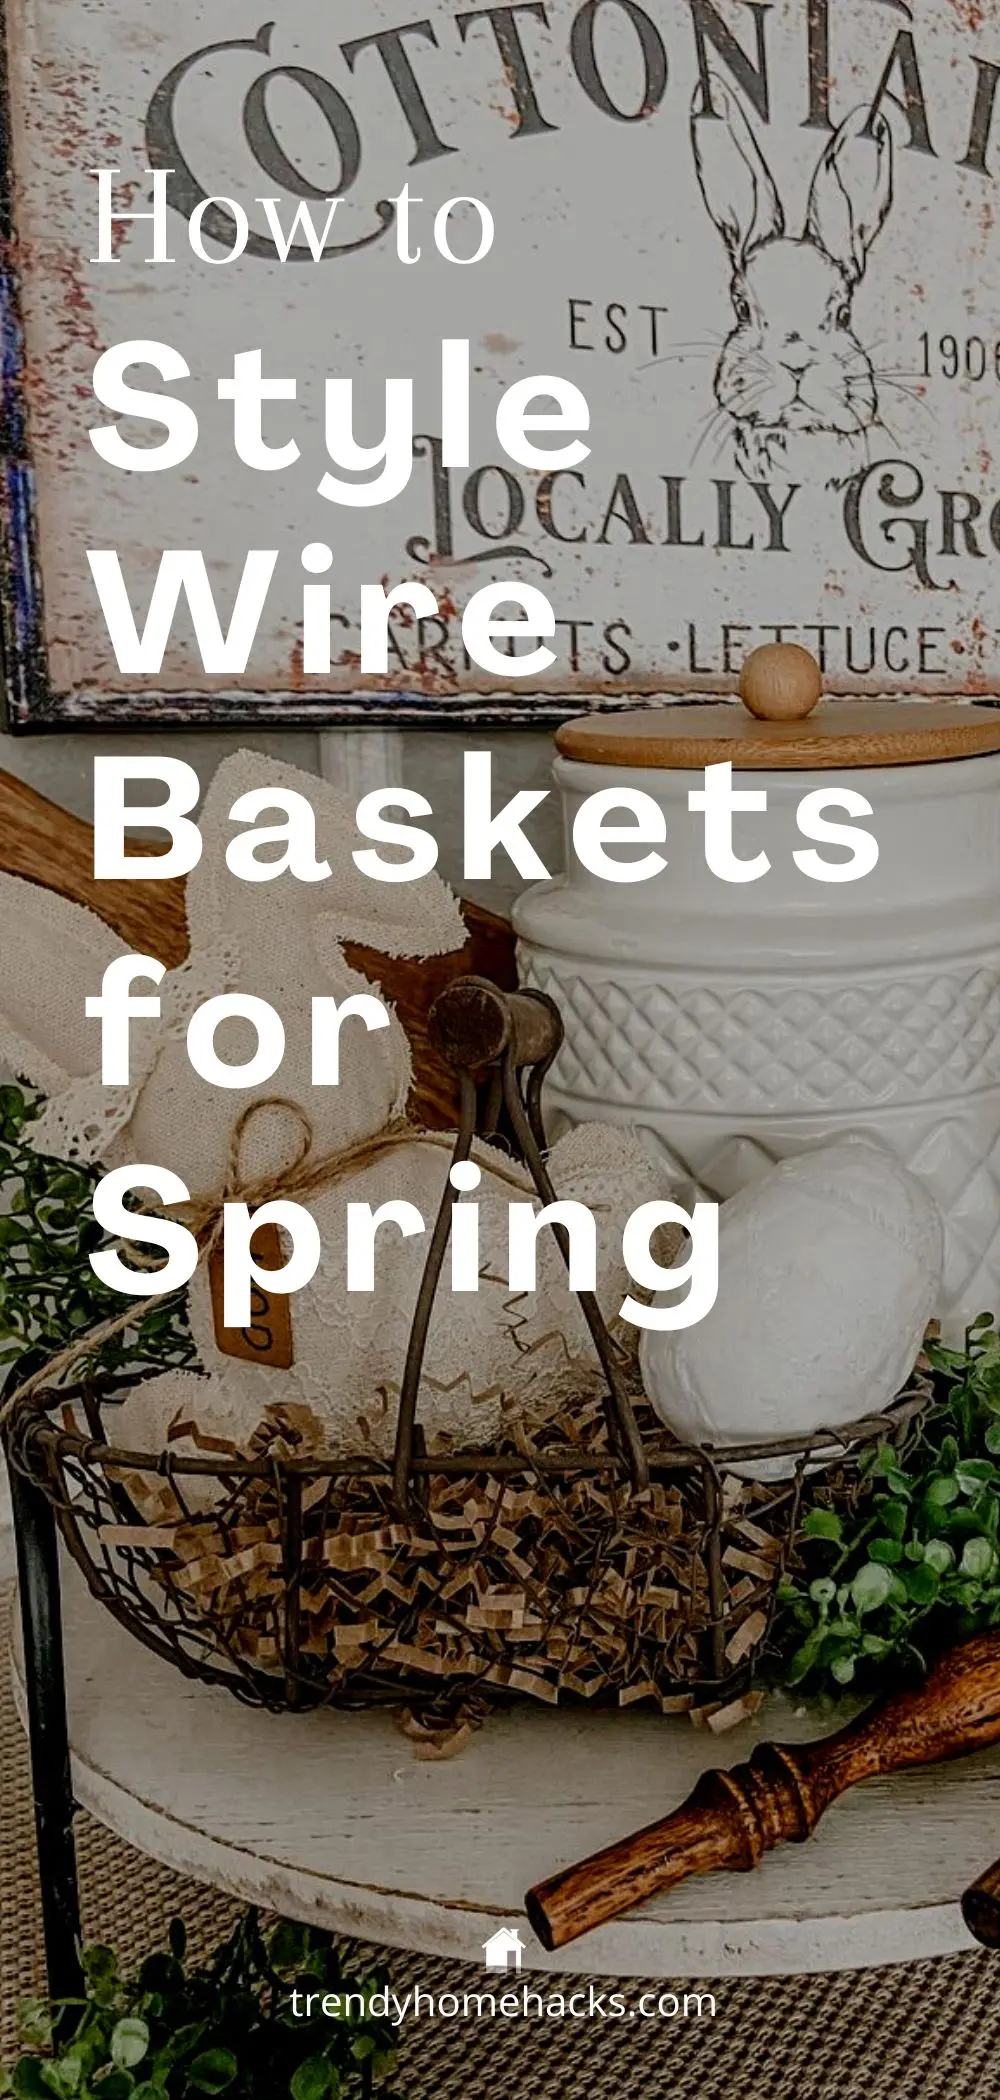 a pinterest pin with a background image of a wire basket and other decor items with the overlay texts "How to Style Wire Baskets for Spring".